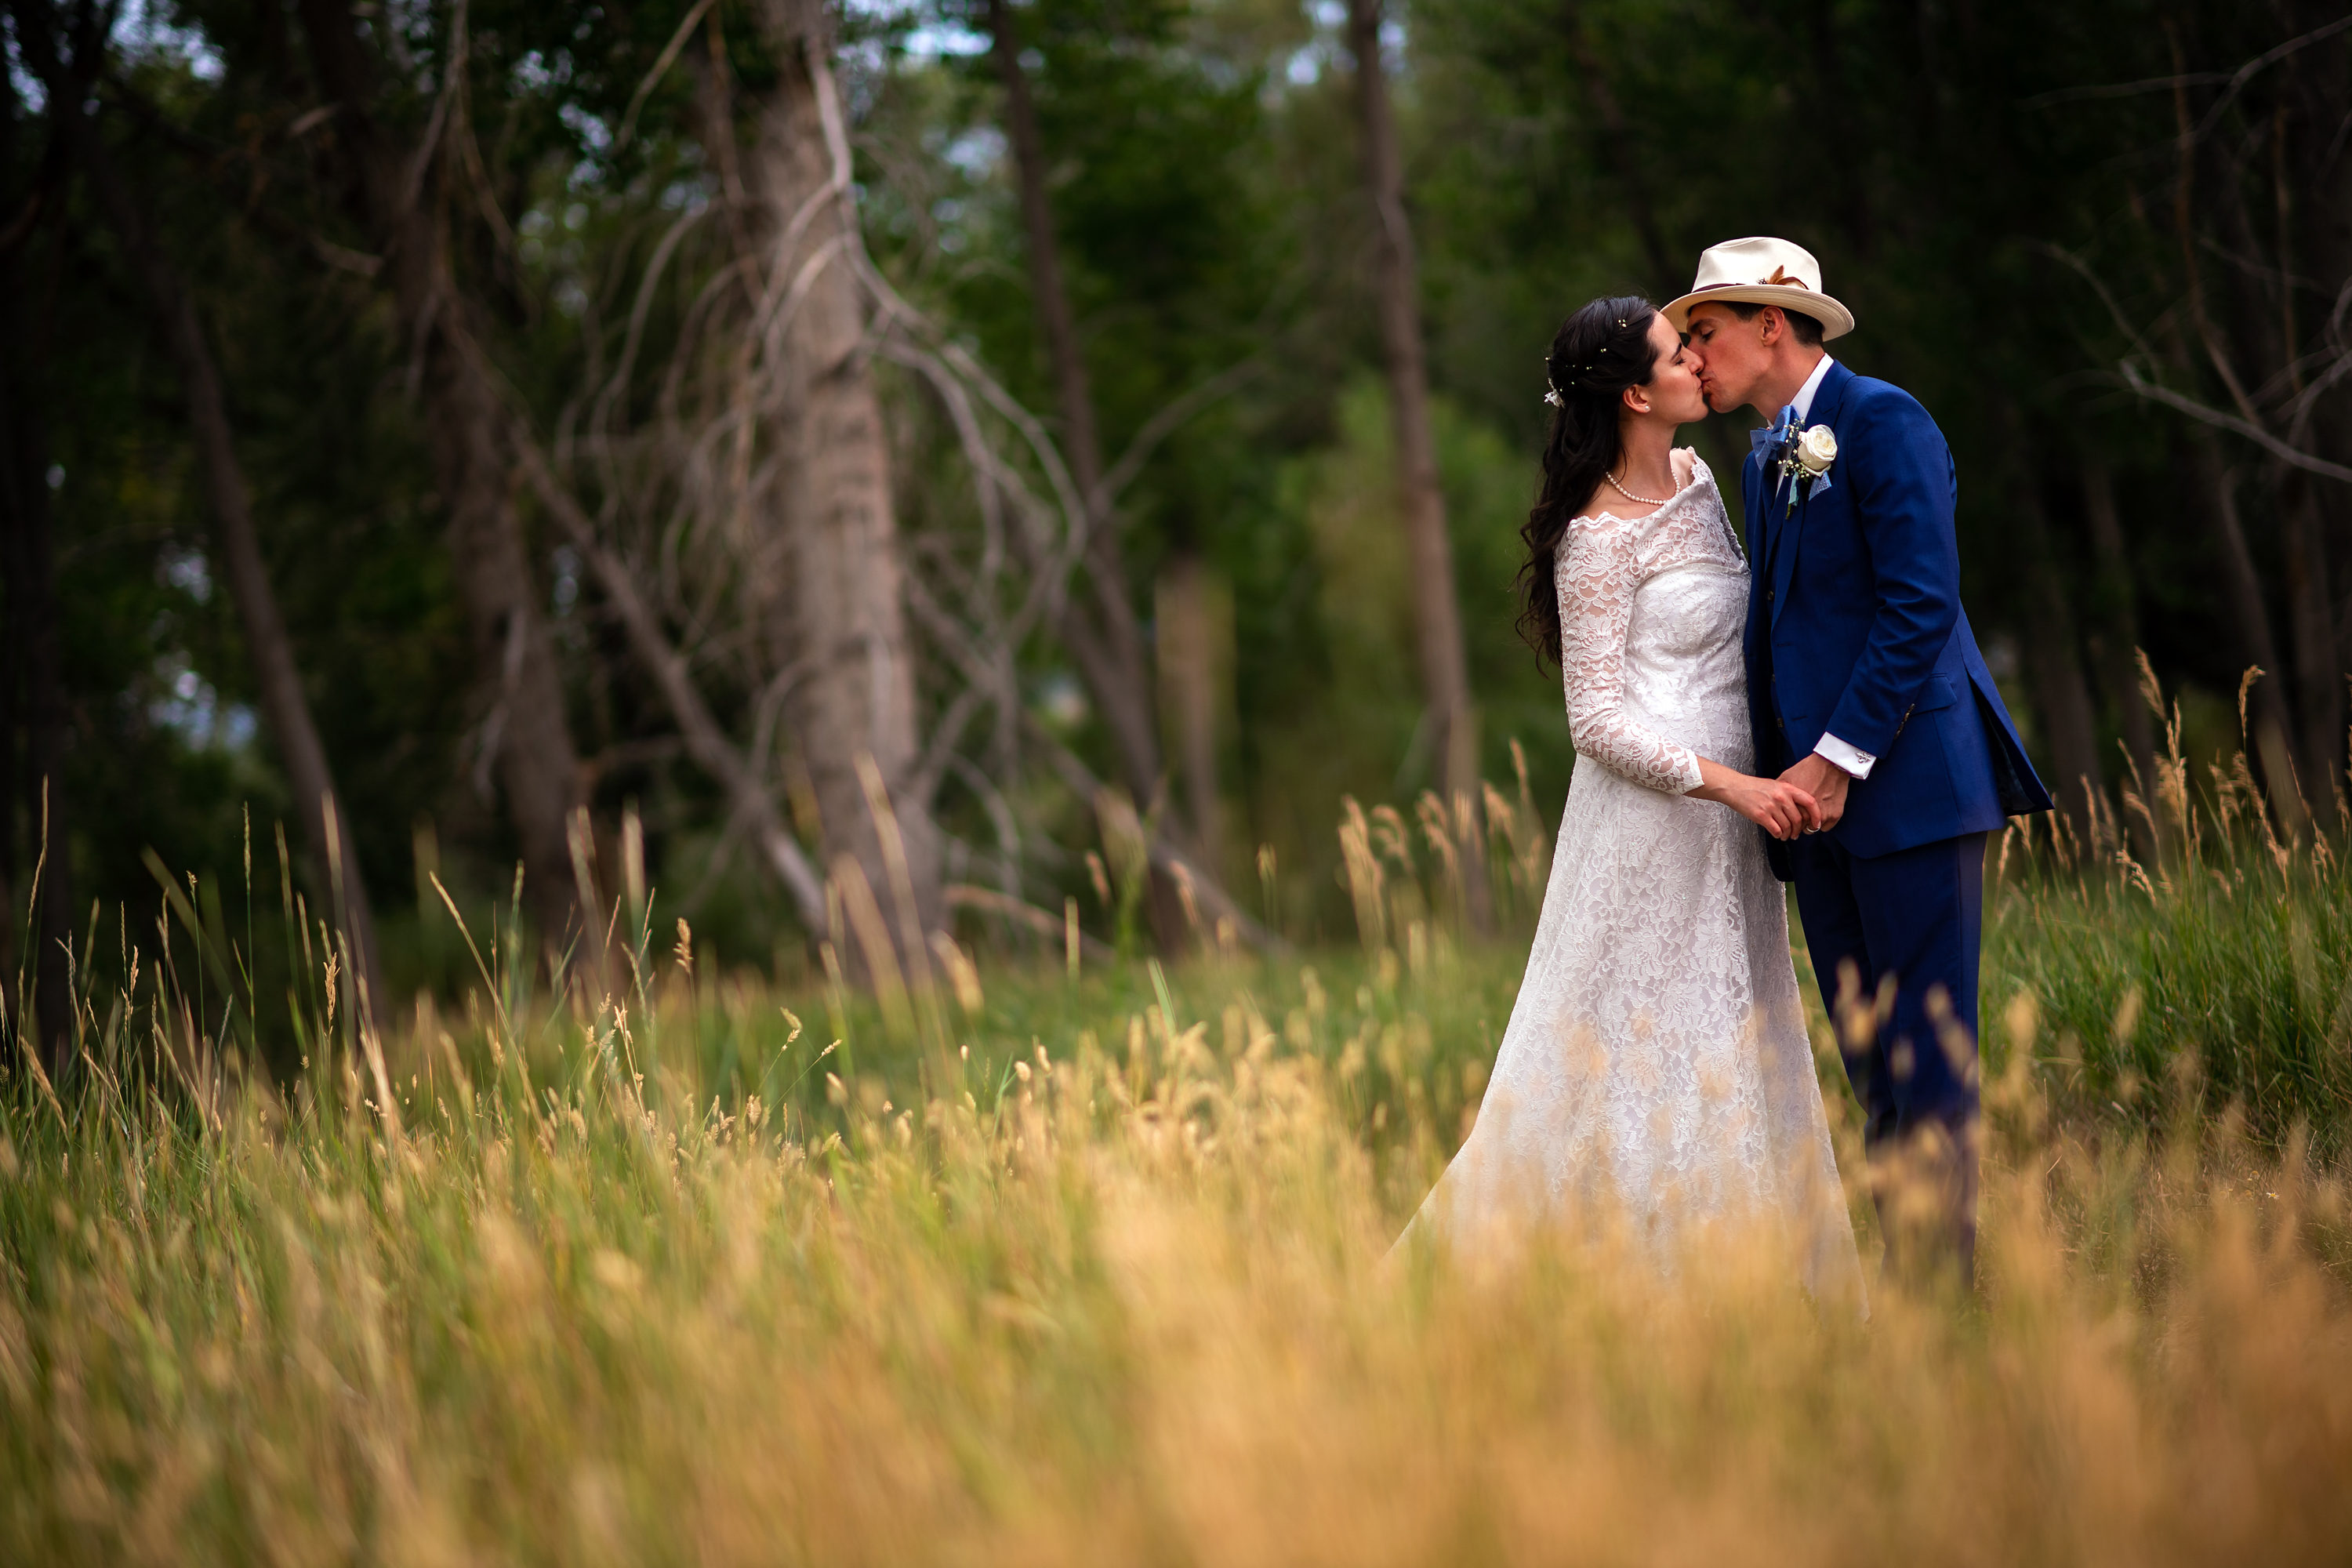 Bride and groom kiss during their wedding portrait session at Bear Creek Lake Park in Lakewood, Colorado.